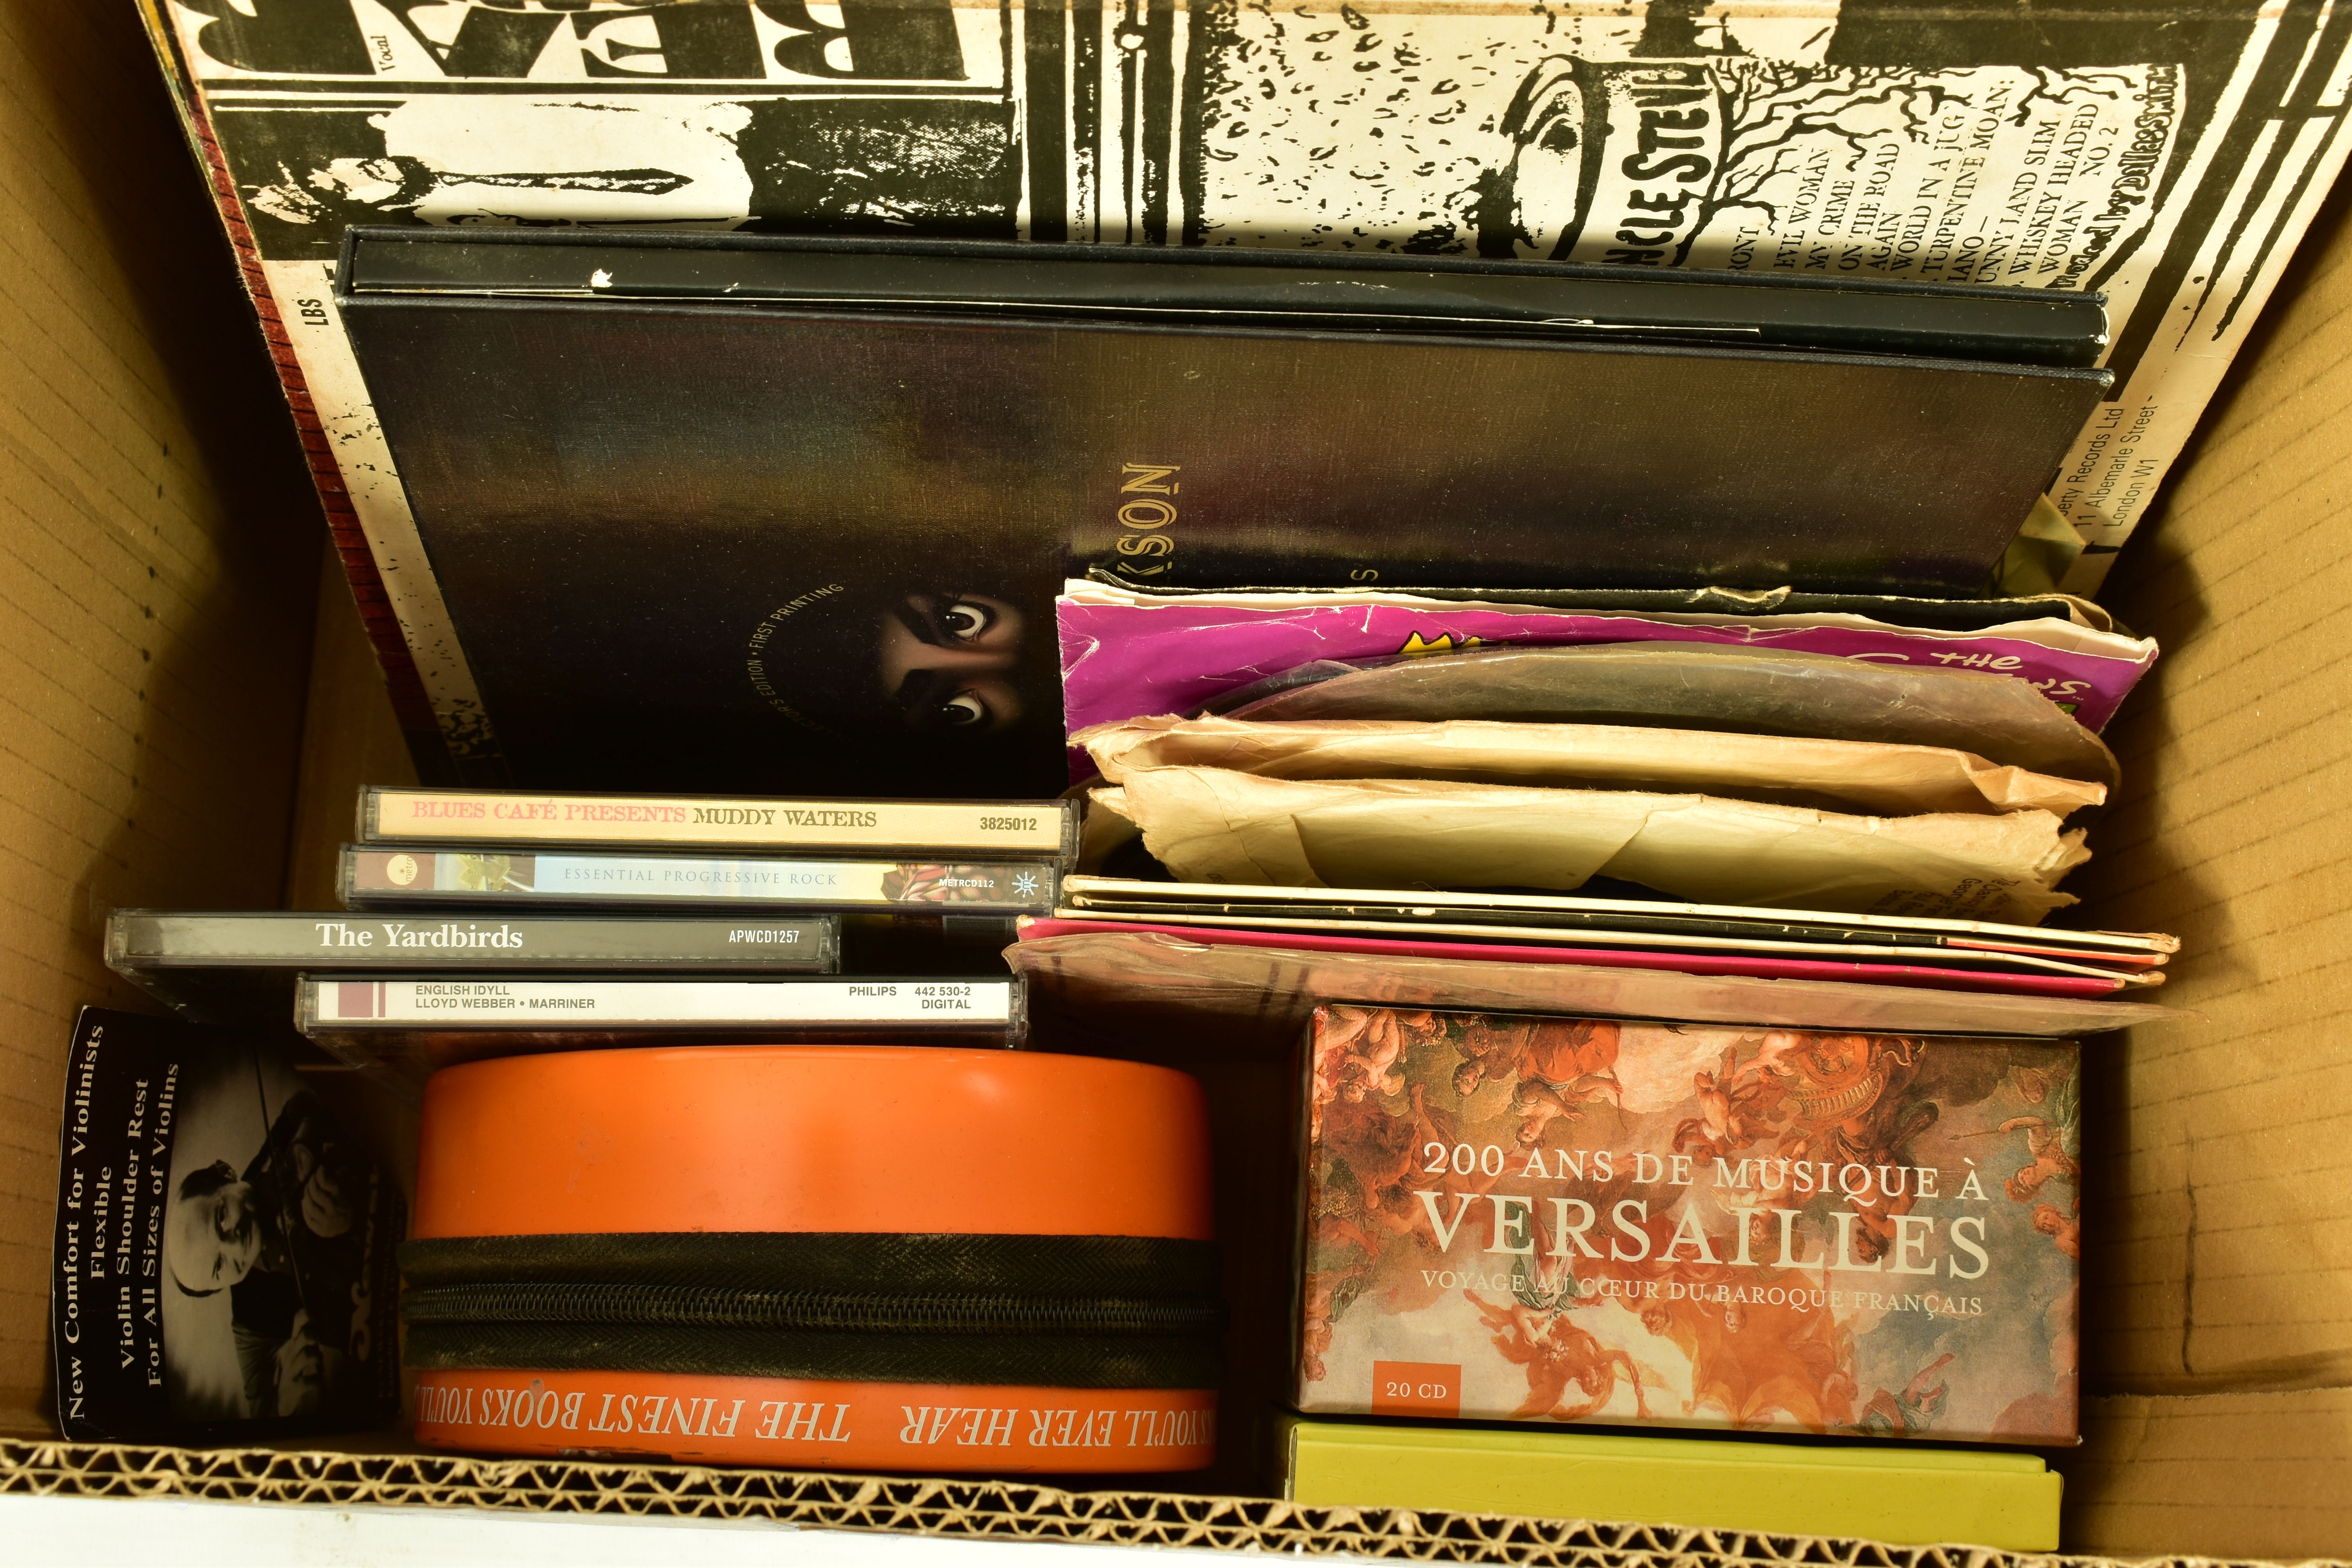 A TRAY CONTAINING LPs , SINGLES, CDs of mostly classical music but other items of note are thats - Bild 2 aus 8